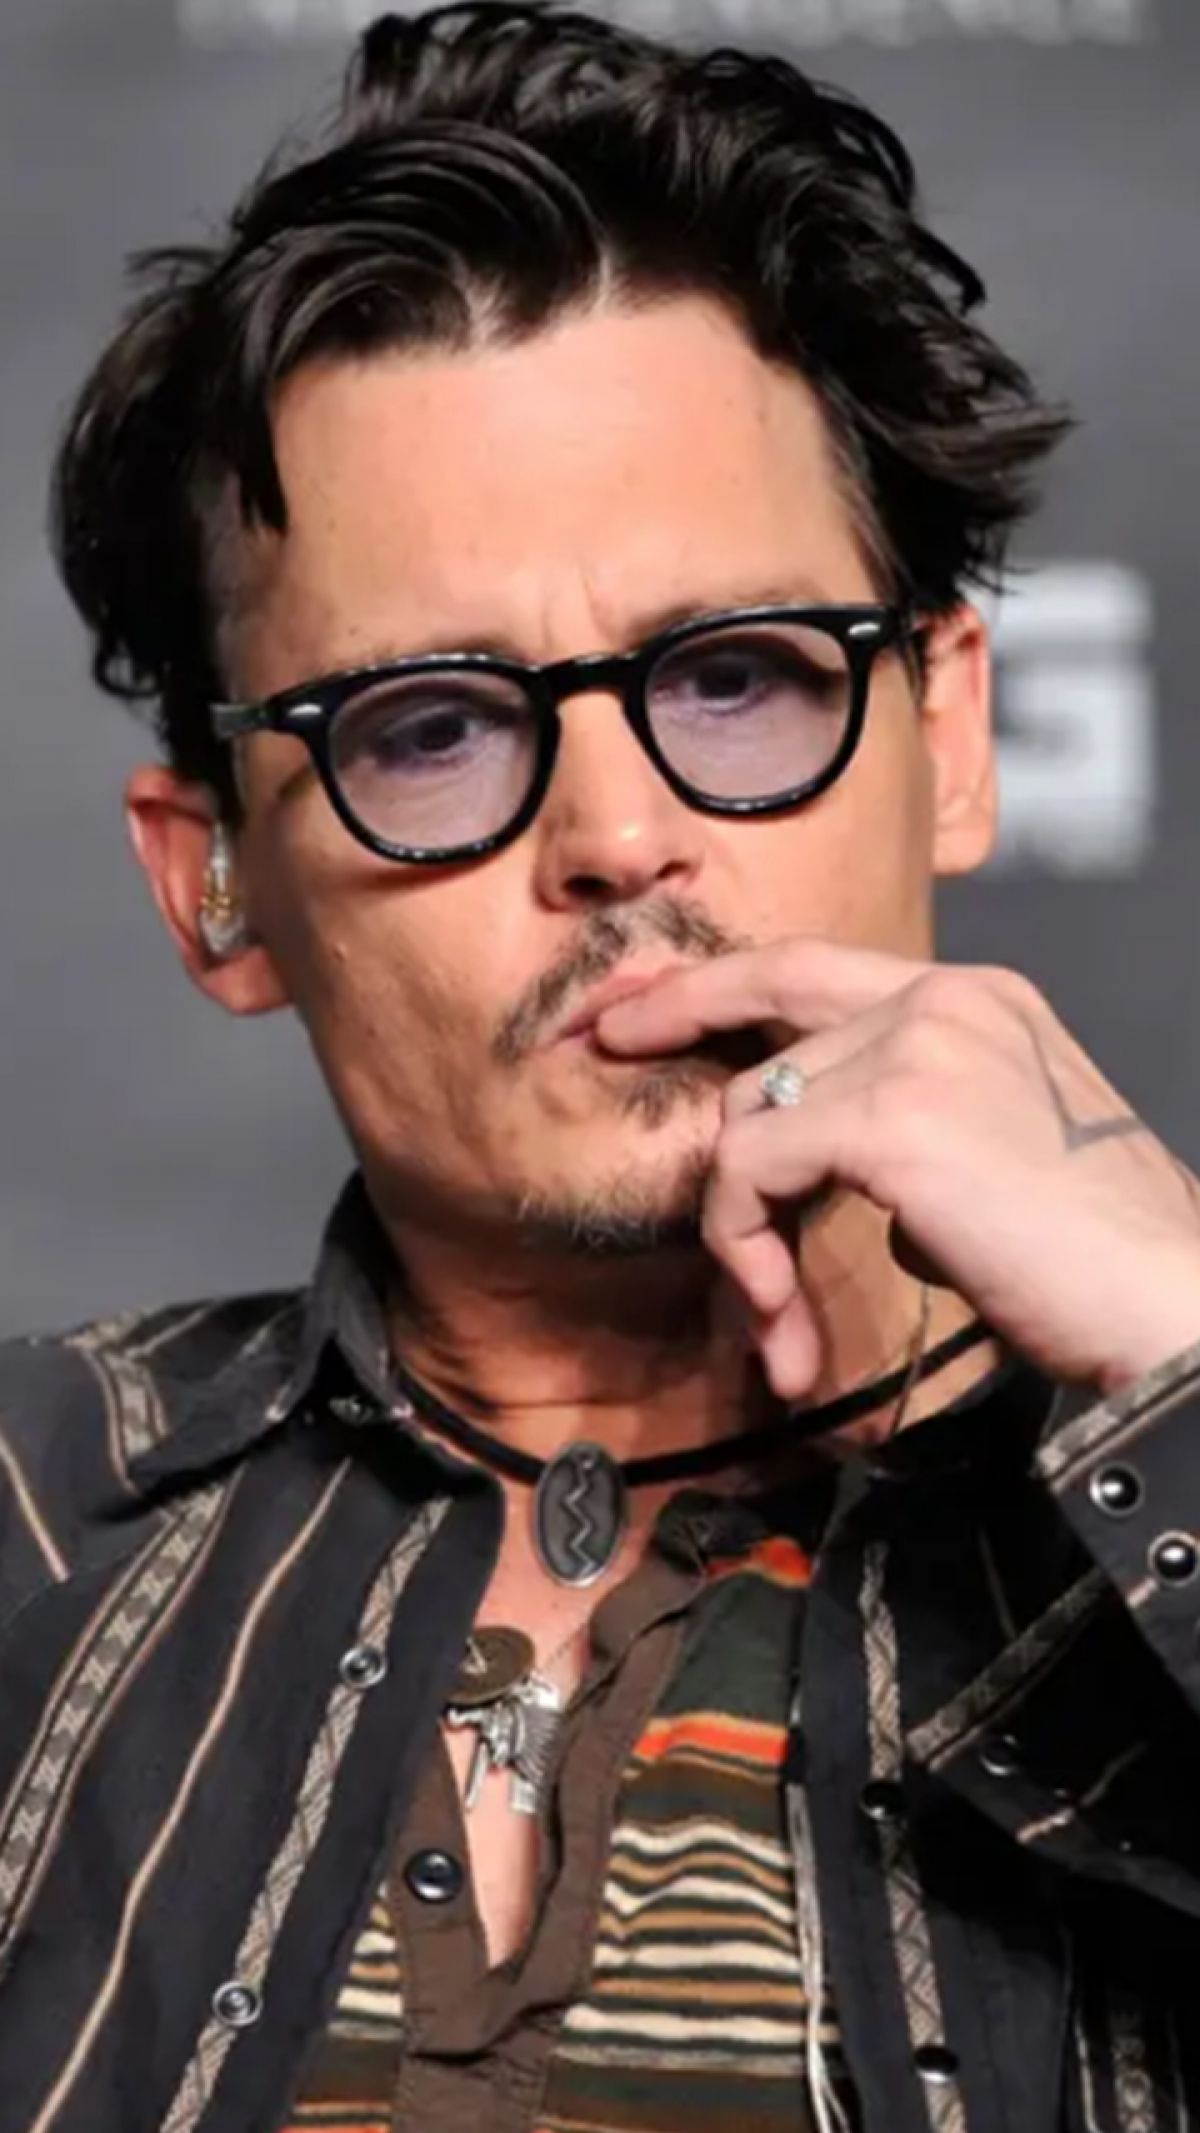 LVMH CEO says Johnny Depp 'working very well' for Dior Sauvage sales